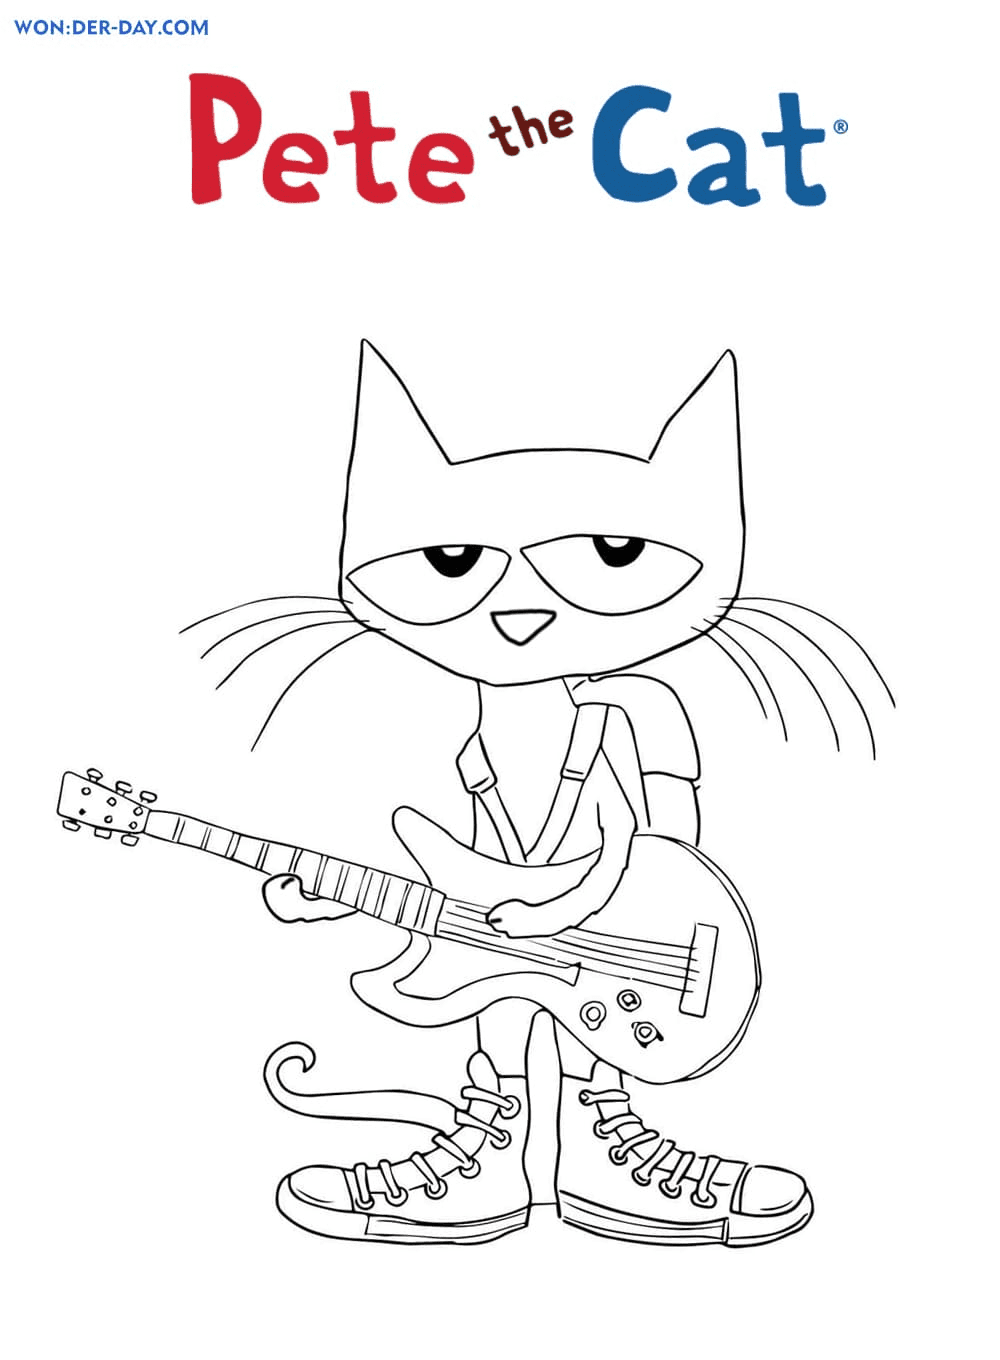 Pete the Cat plays the Guitar Coloring Pages